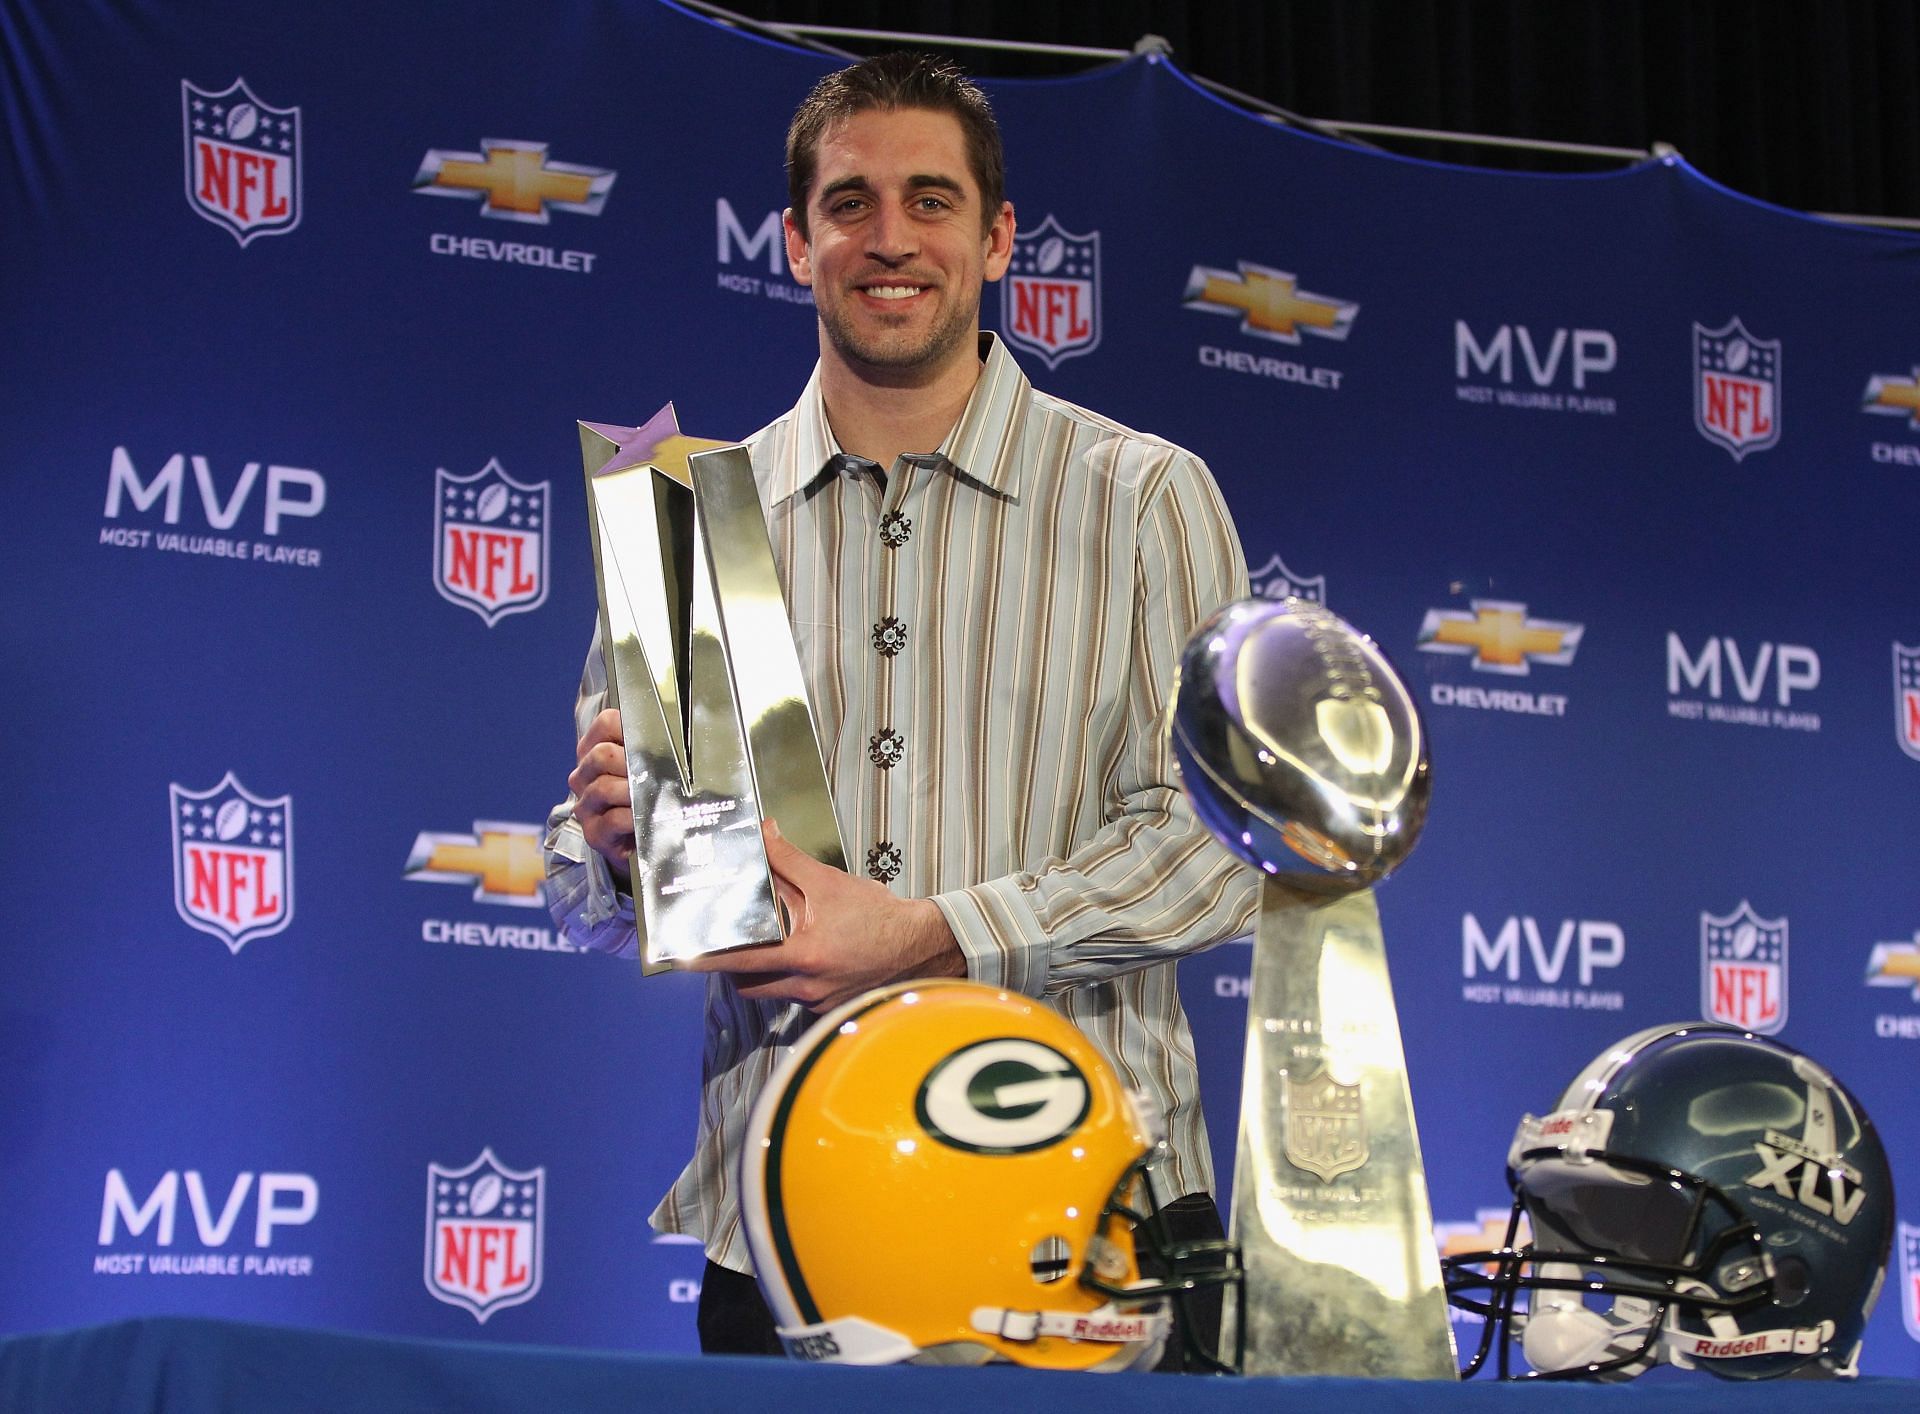 Rodgers with the Lombardi and MVP trophy for winning the Super Bowl in 2010